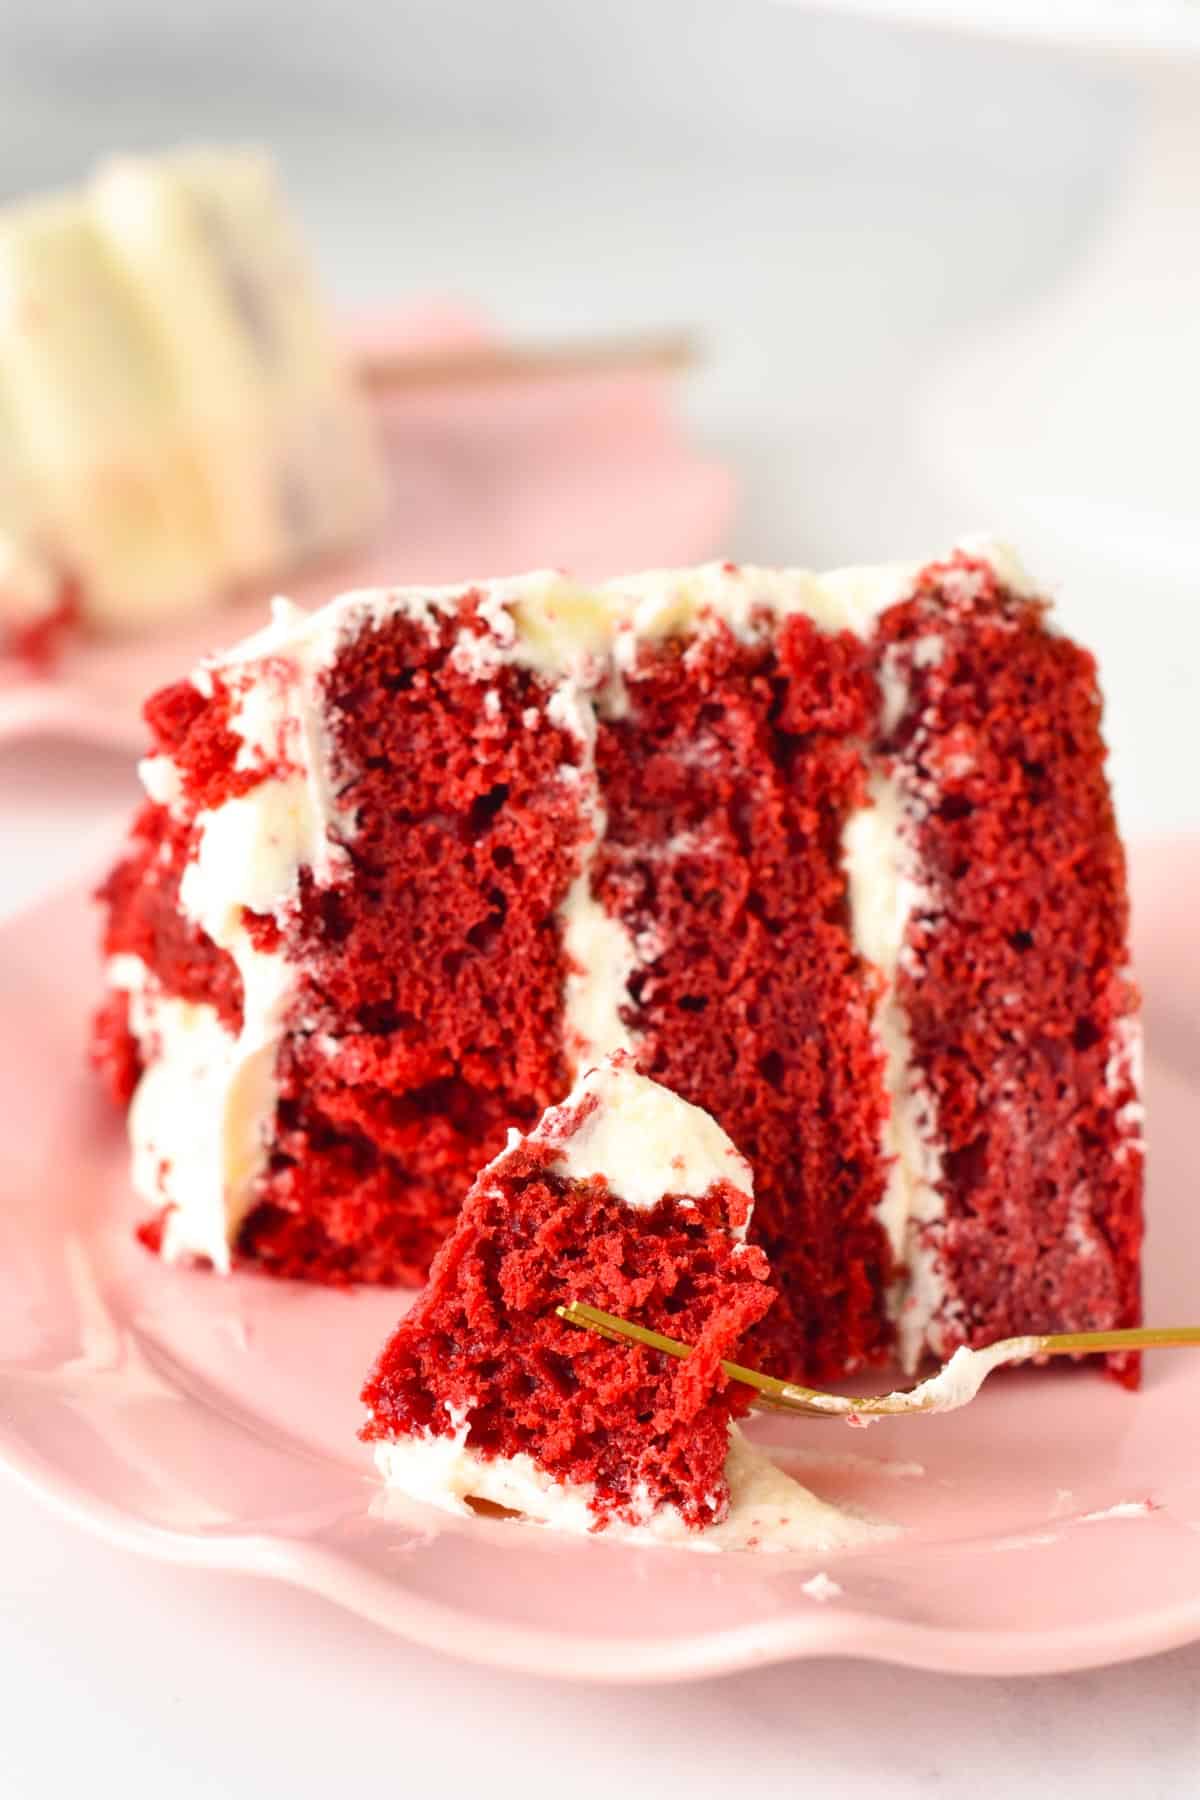 A close-up view of a slice of vegan red velvet cake with three layers and filled with dairy-free cream cheese frosting